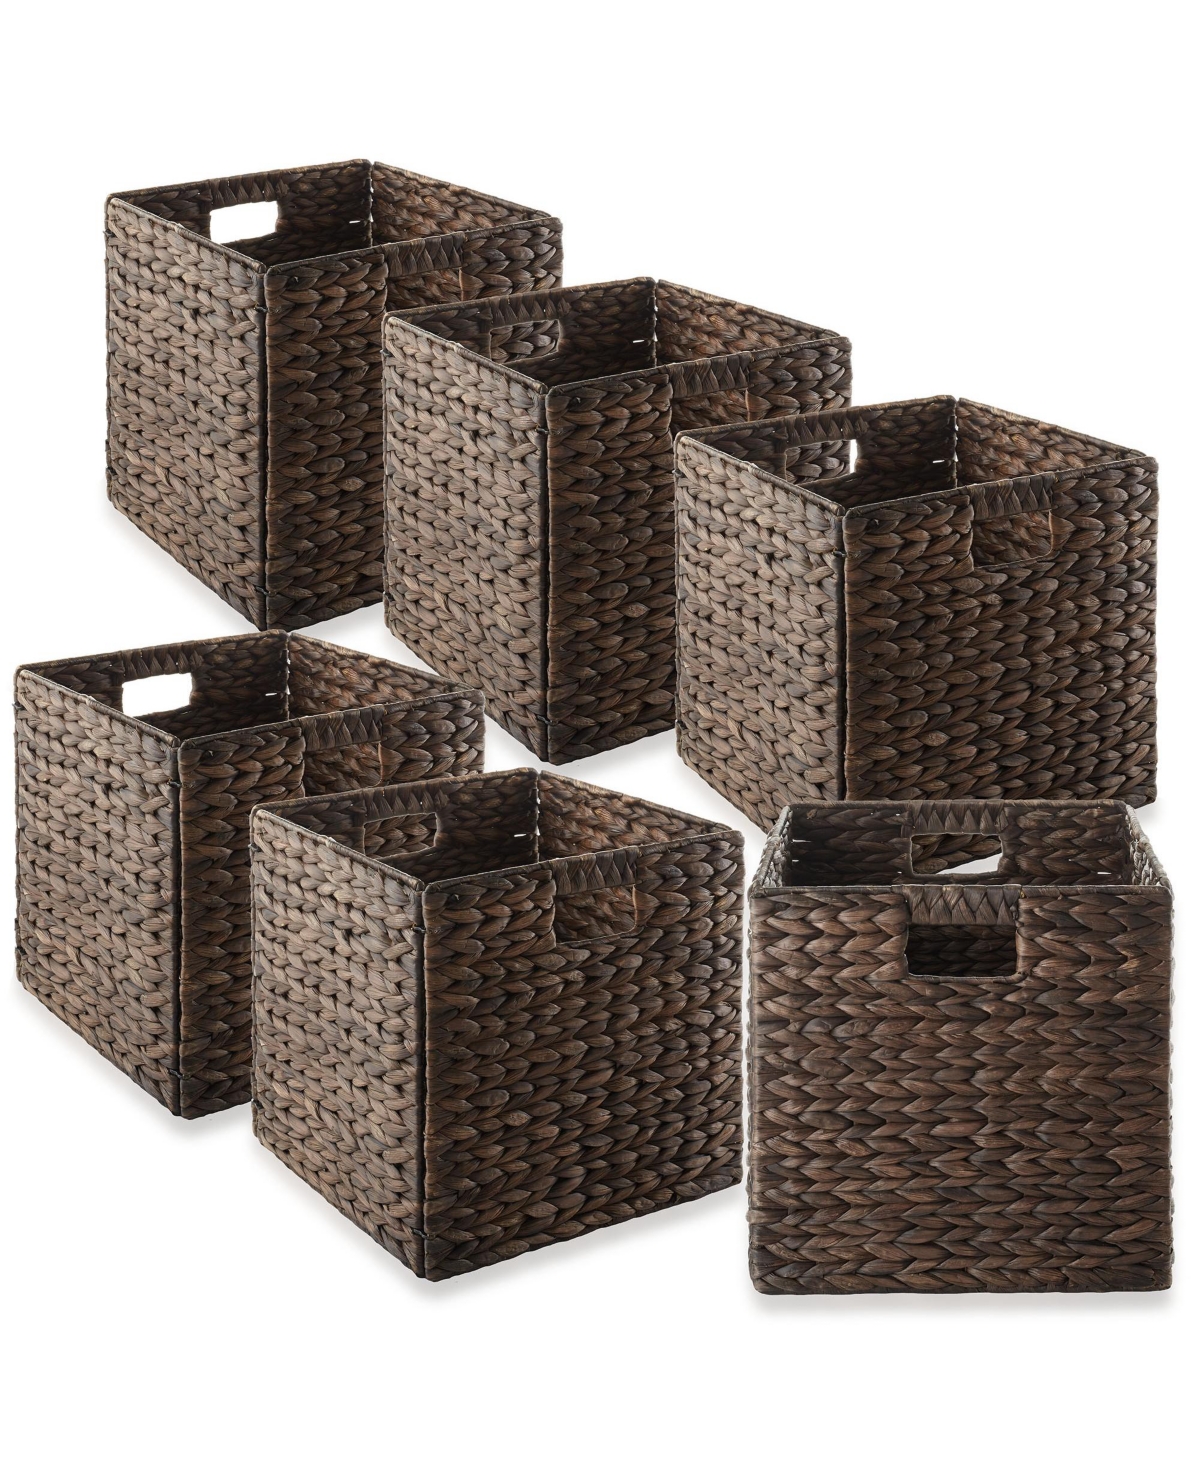 12" x 12" Water Hyacinth Storage Baskets, Natural - Set of 2 Collapsible Cube Organizers, Woven Bins for Bathroom, Bedroom, Laundry, Pantry,